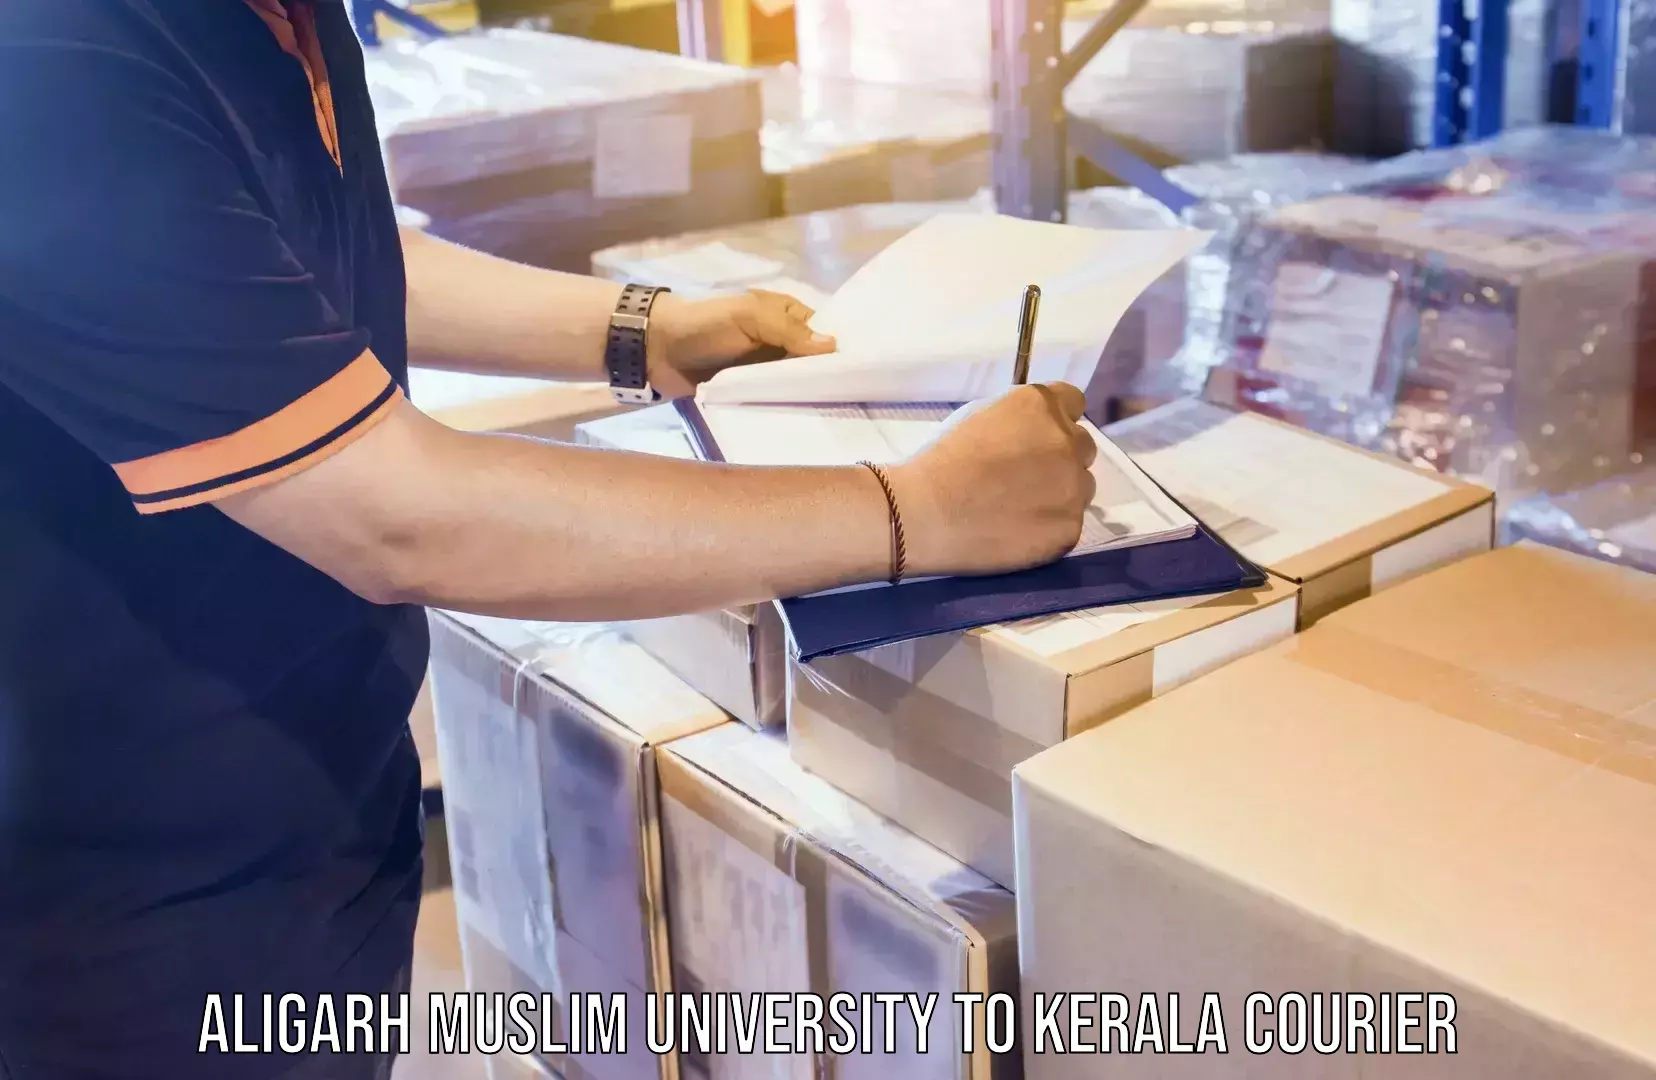 Expedited parcel delivery Aligarh Muslim University to Kerala